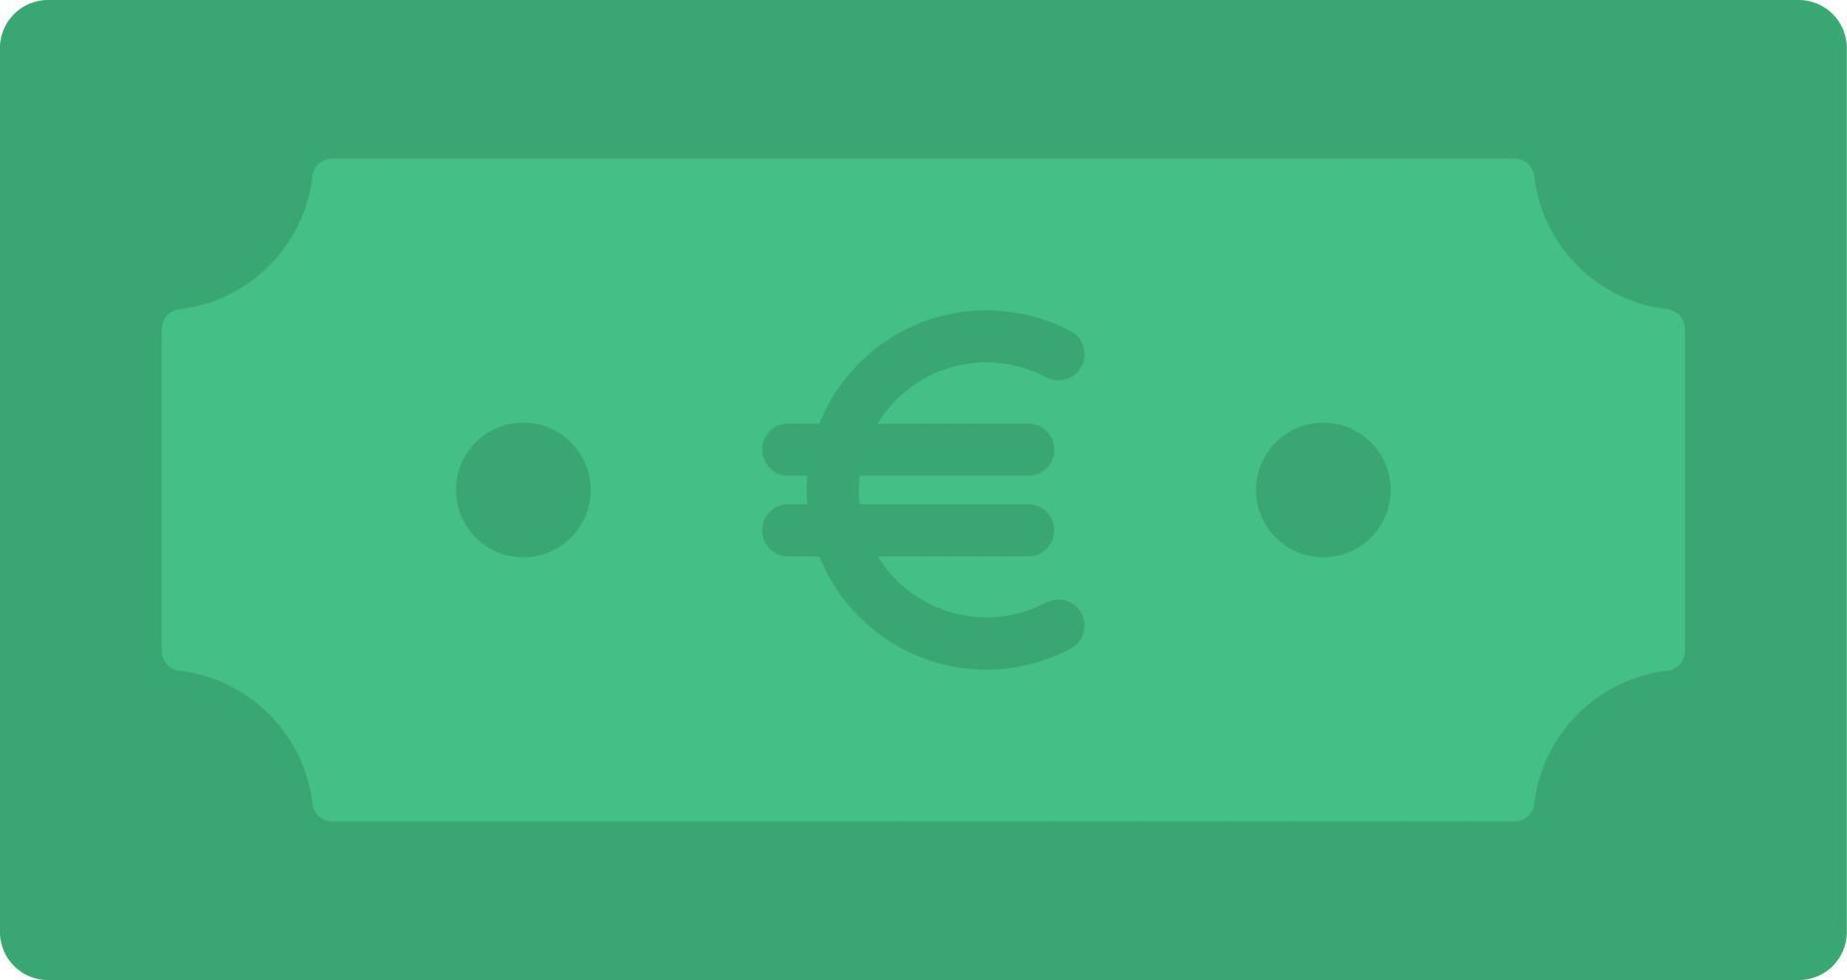 Euro Currency Flat Color Icon vector